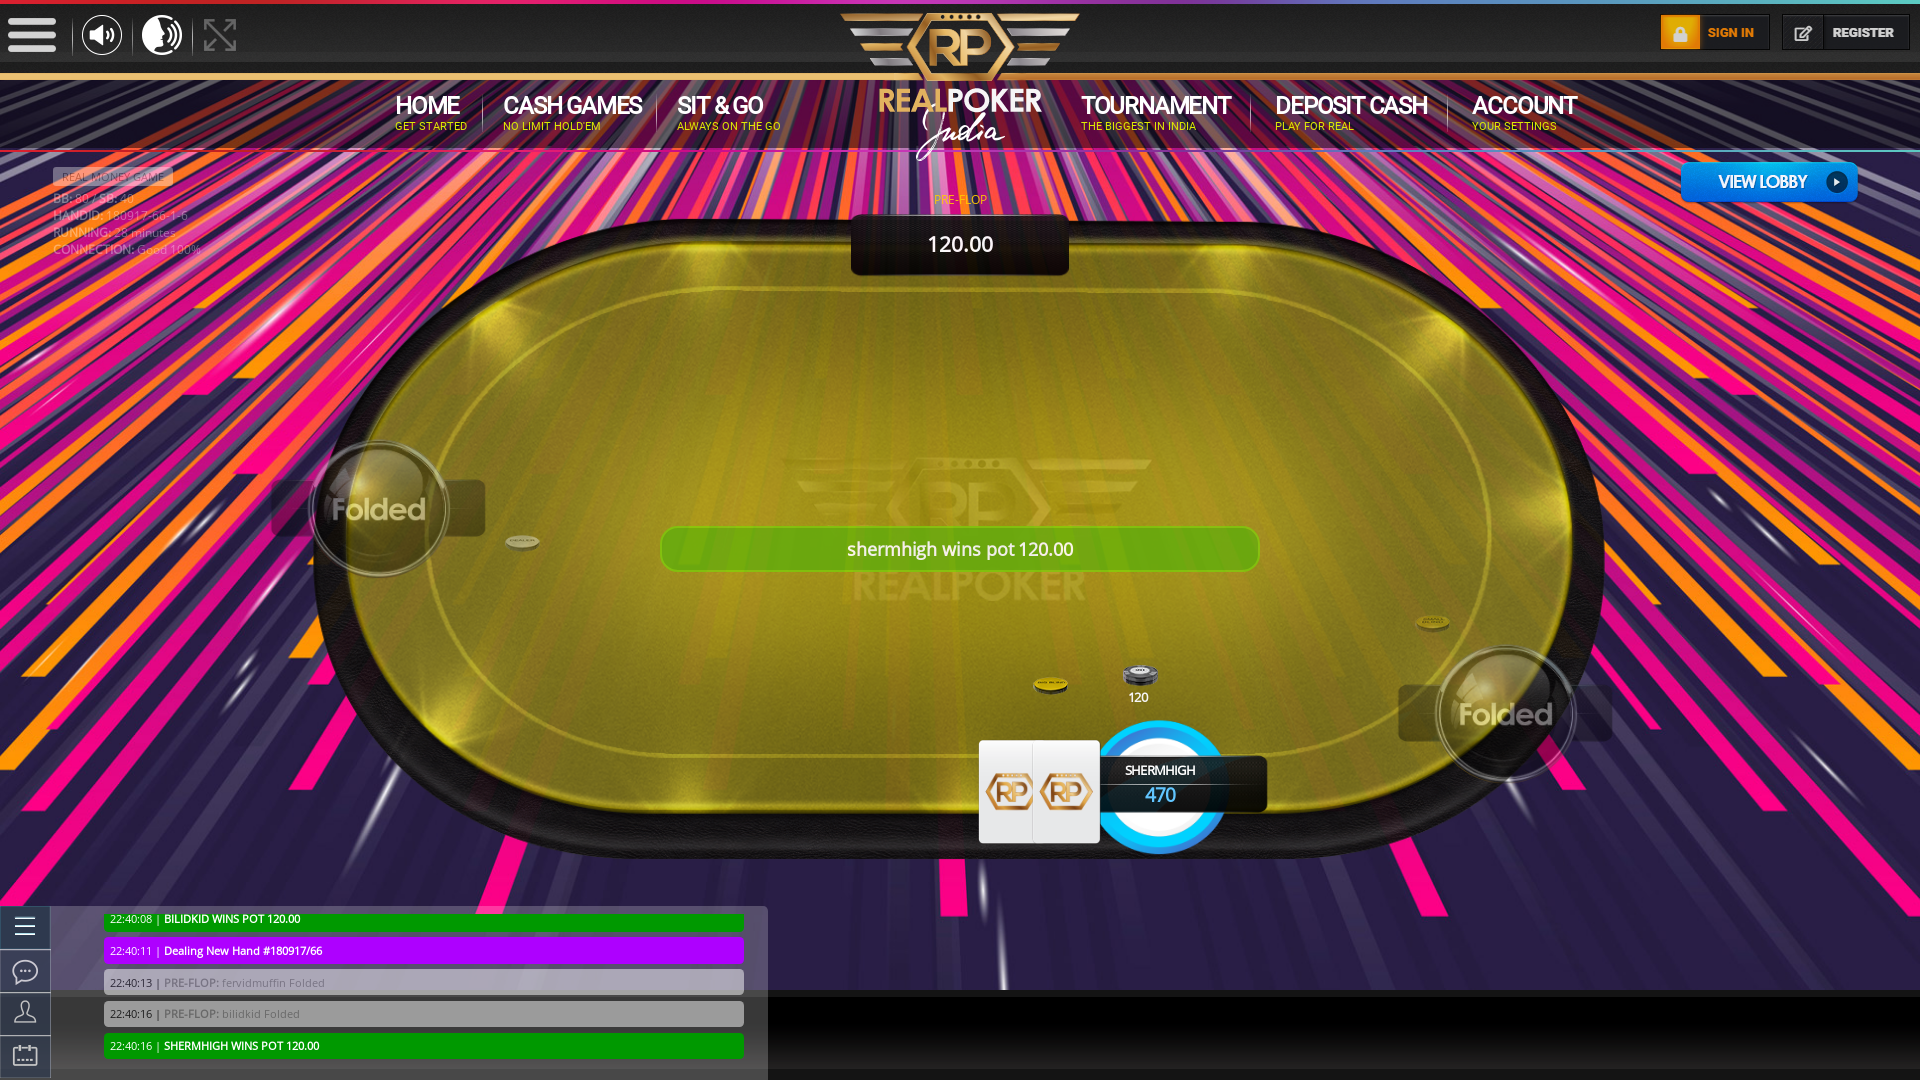 Real poker 10 player table in the 28th minute of the match